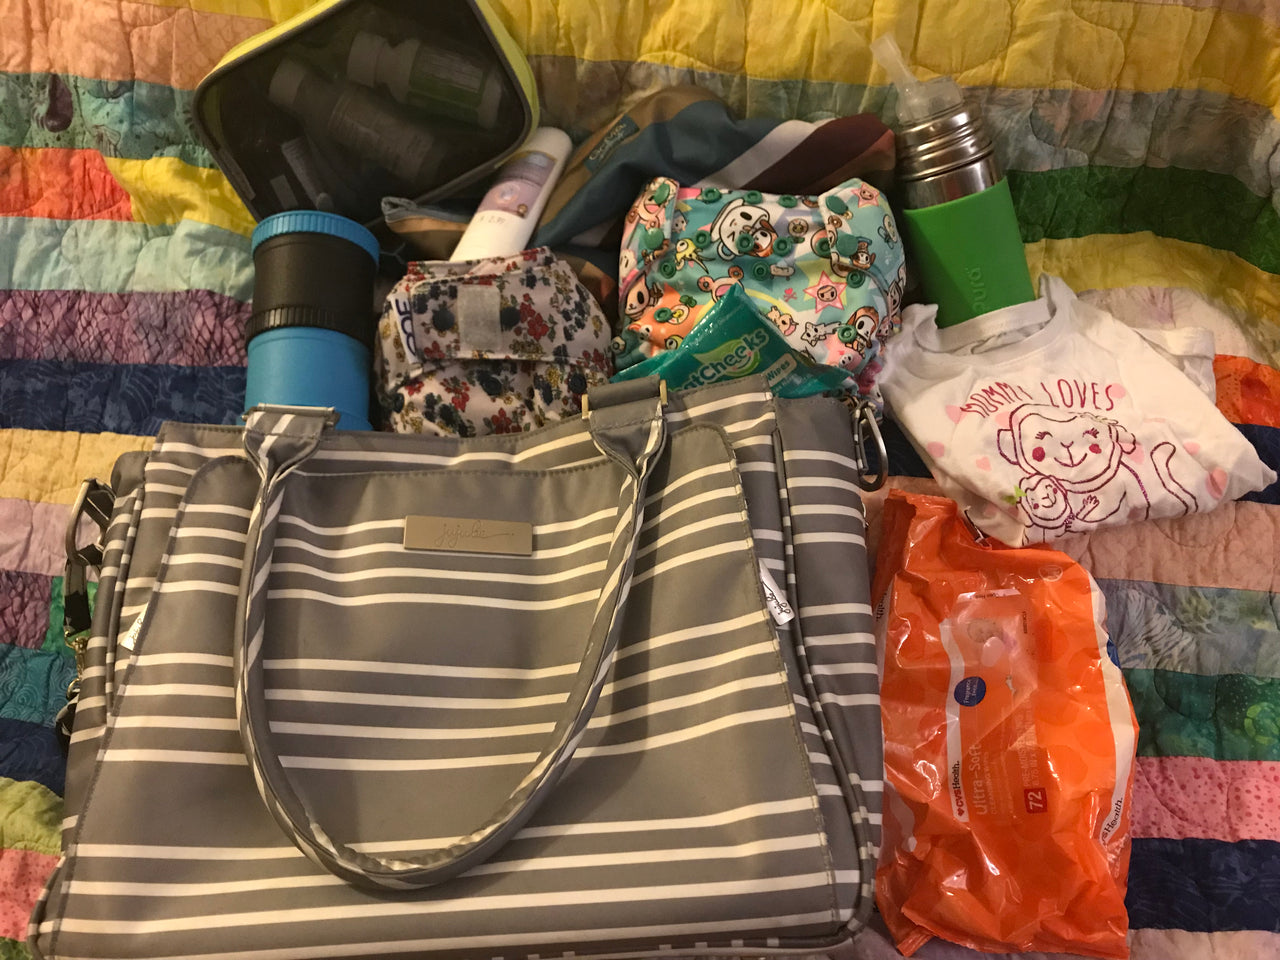 What Should Go in Your Diaper Bag for an Afternoon Out?